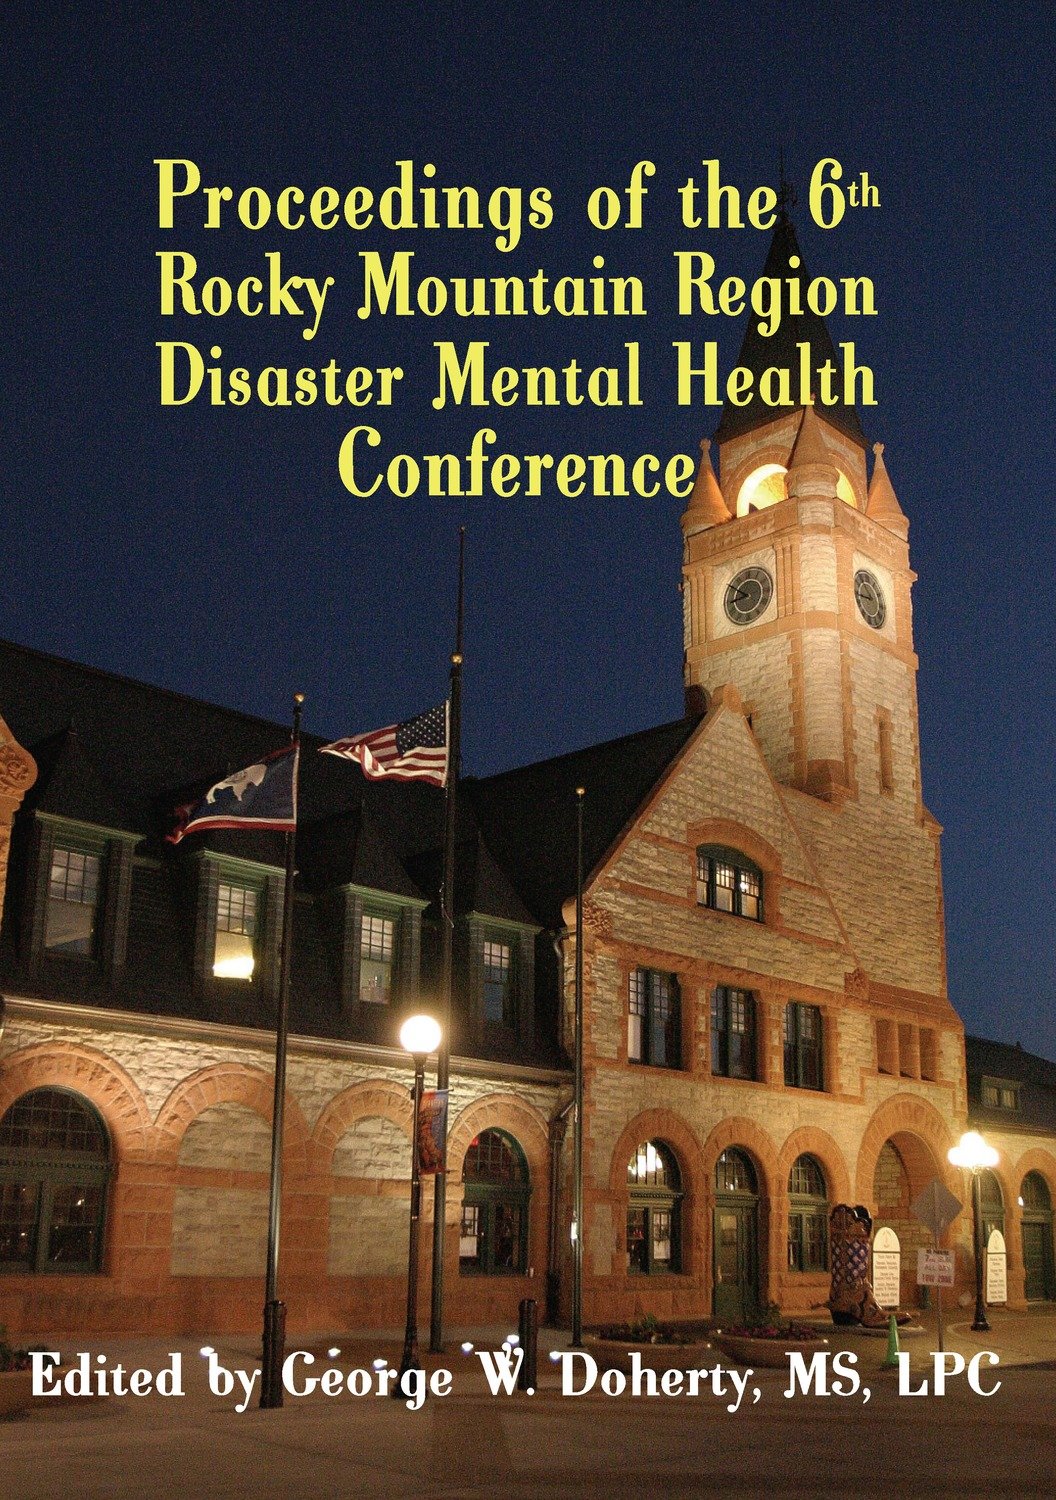 From Crisis to Recovery: Proceedings of the 6th Annual Rocky Mountain Disaster Mental Health Conference